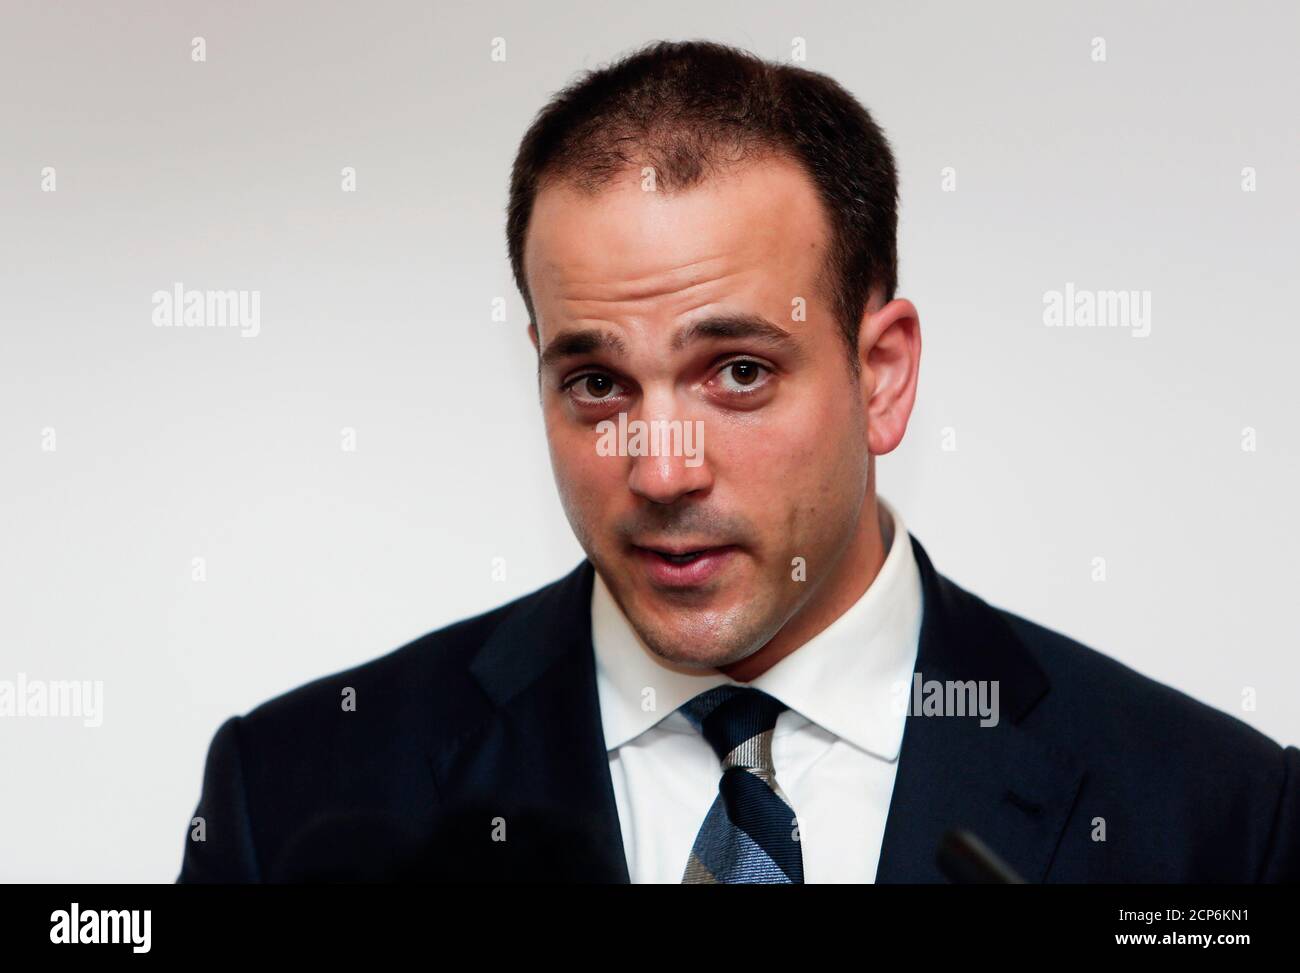 Michael Kobold, spokesperson of Gandolfini family, speaks during a news conference about James Gandolfini's death in Rome June 20, 2013. Gandolfini, the burly actor best known for his Emmy-winning portrayal of a conflicted New Jersey mob boss in the groundbreaking TV series 'The Sopranos,' died on Wednesday vacationing in Italy. He was 51. REUTERS/Yara Nardi (ITALY - Tags: OBITUARY ENTERTAINMENT) Stock Photo